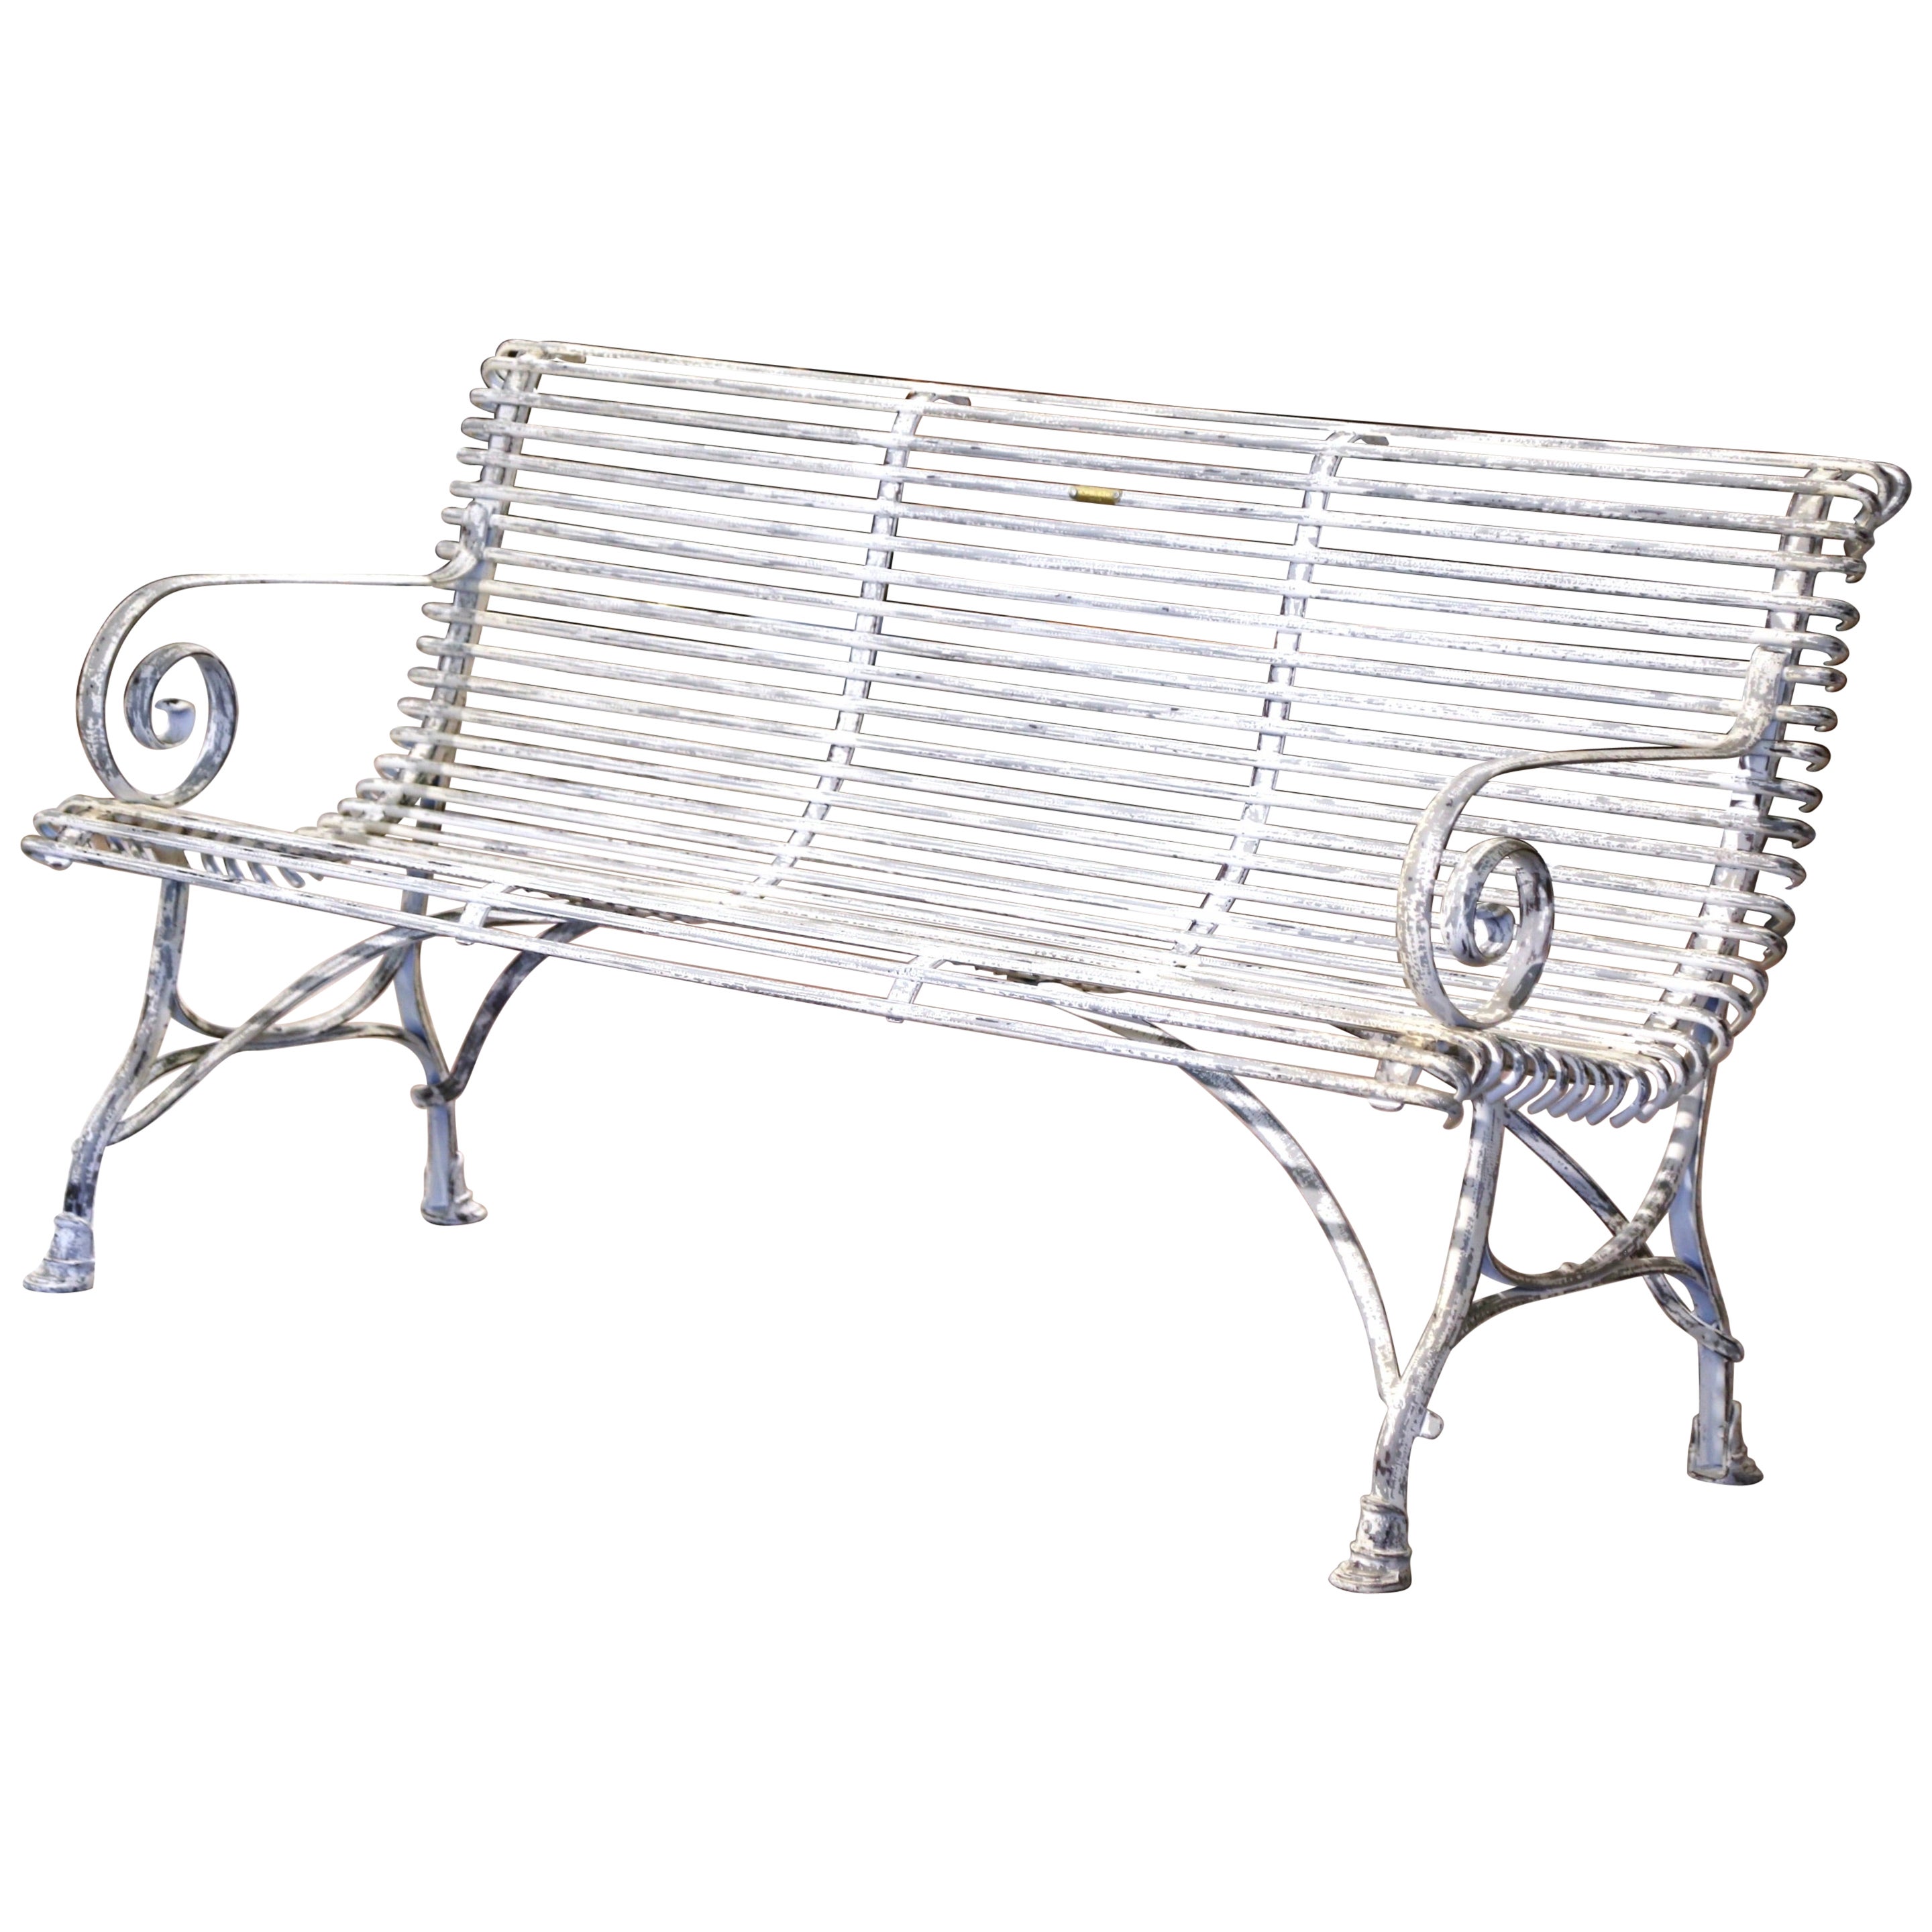 Vintage French Painted Iron Three-Seat Garden Bench Signed Sauveur Arras